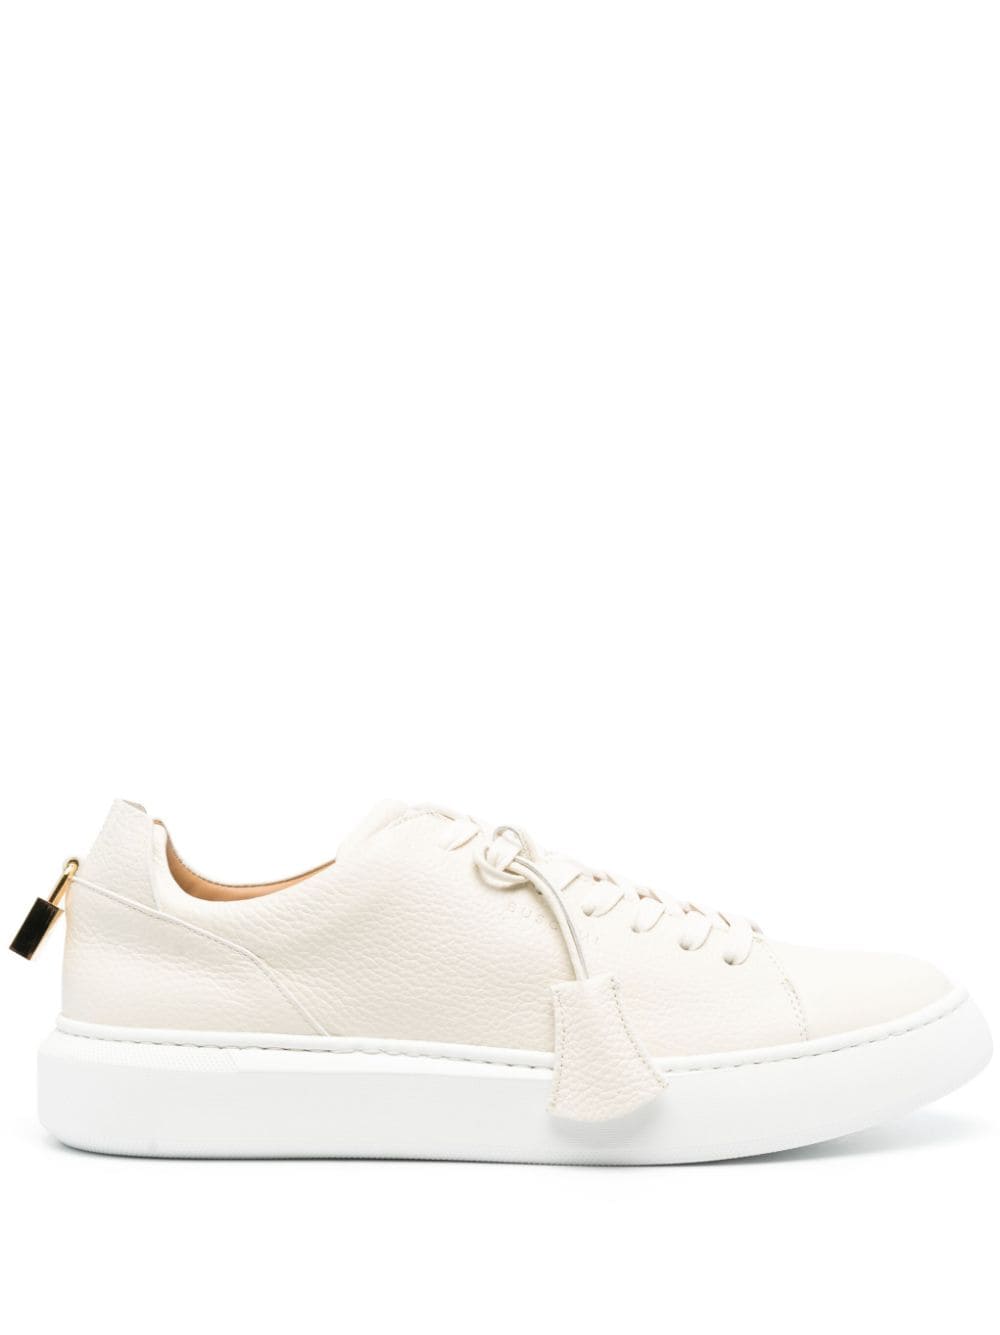 Buscemi calf-leather low-top sneakers